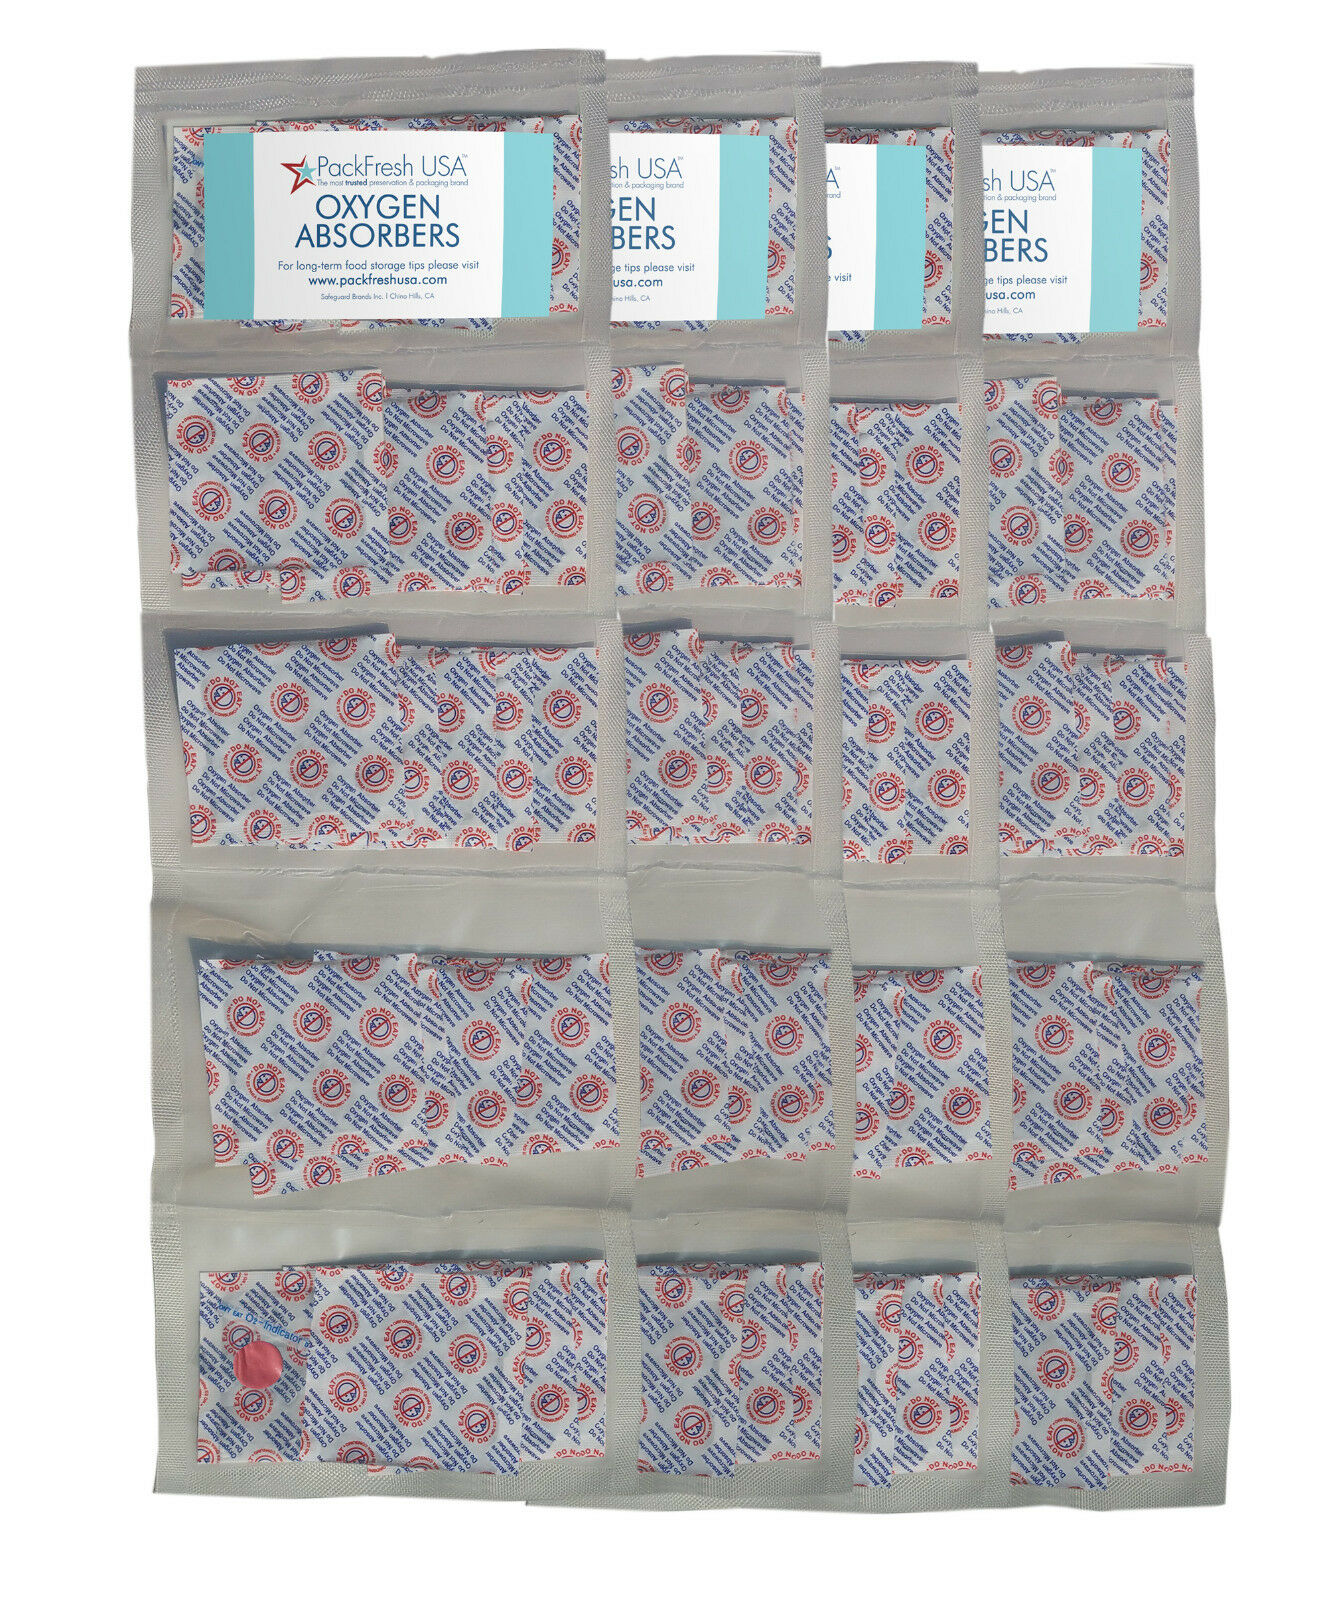 Packfreshusa Oxygen Absorbers Compartment Packs - Available In 50cc 100cc 300cc